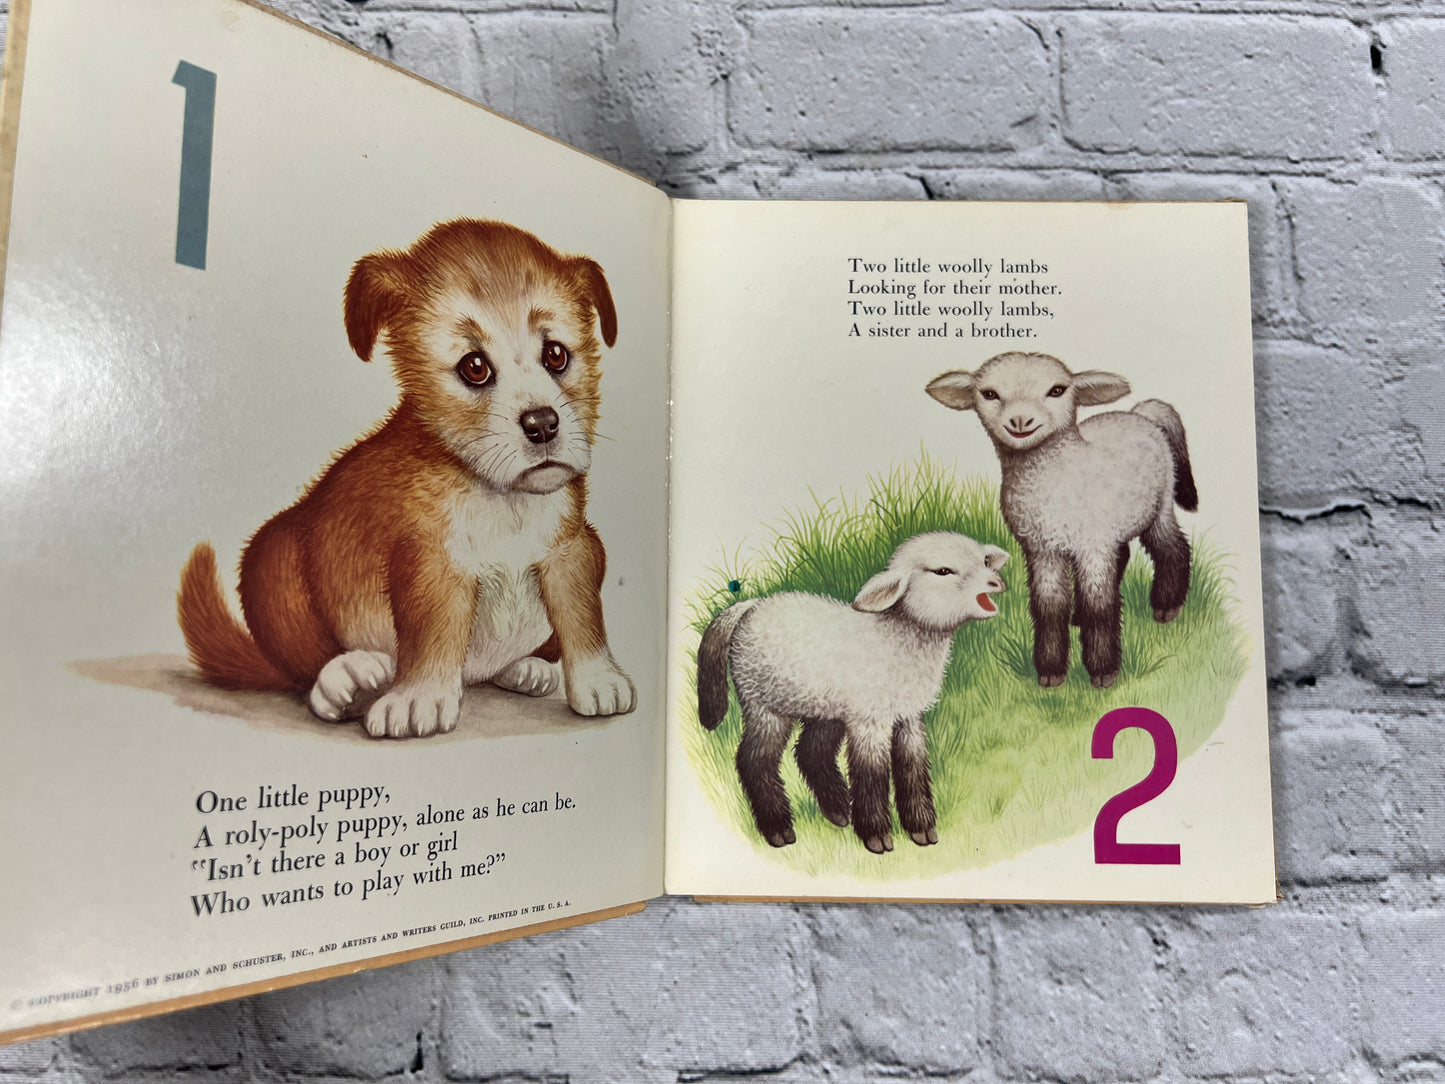 My First Counting Book by Lilian Moore [A Golden Book · 1956]